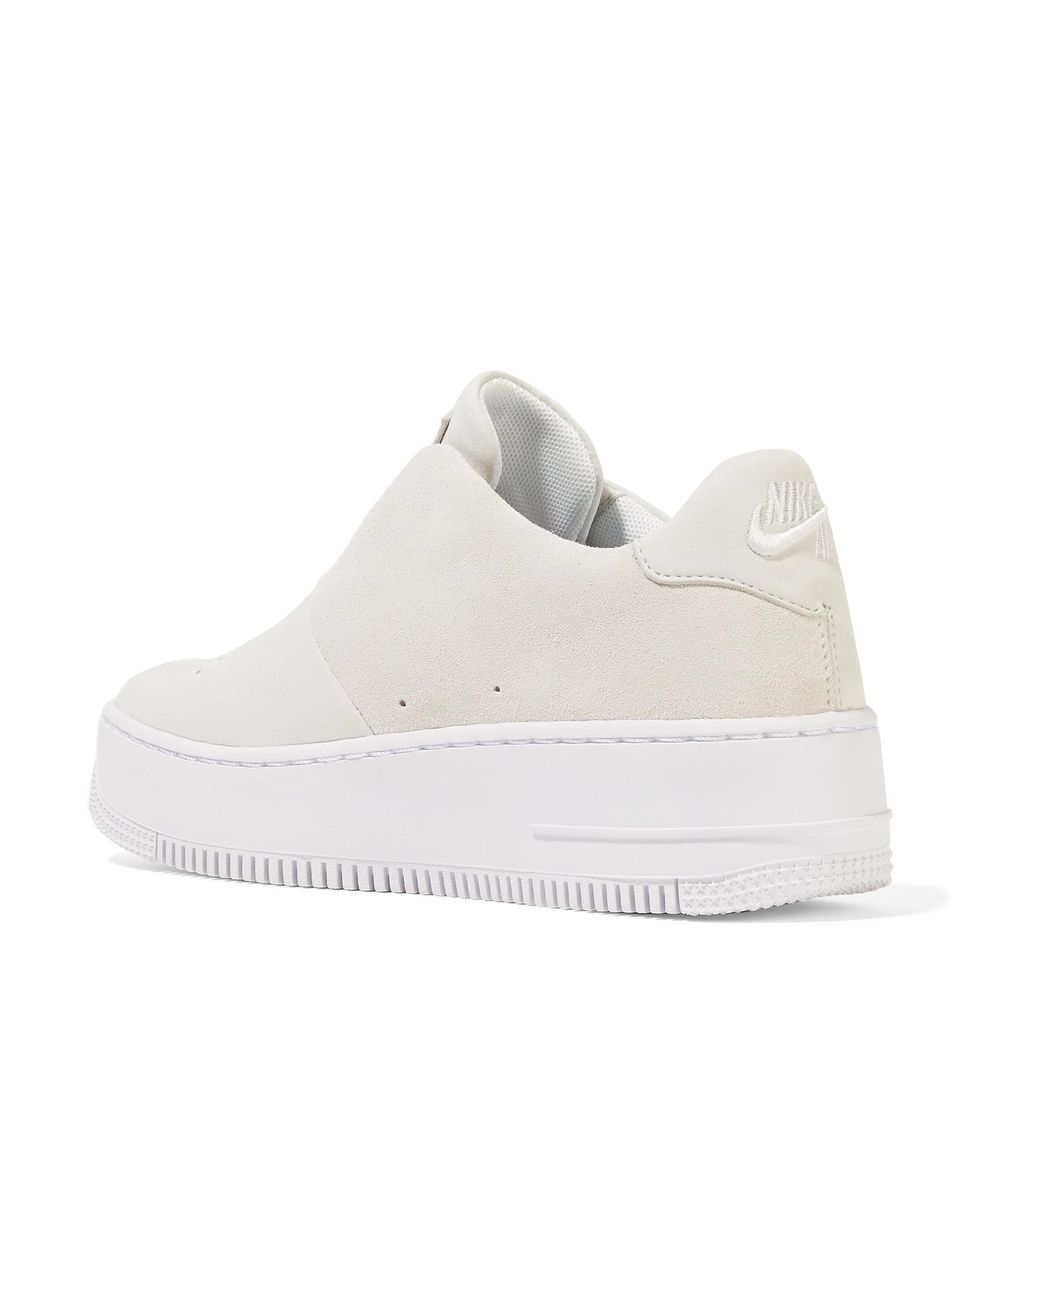 Nike The 1's Reimagined Lab Air Force 1 Sage Suede Slip-on Sneakers in  White | Lyst